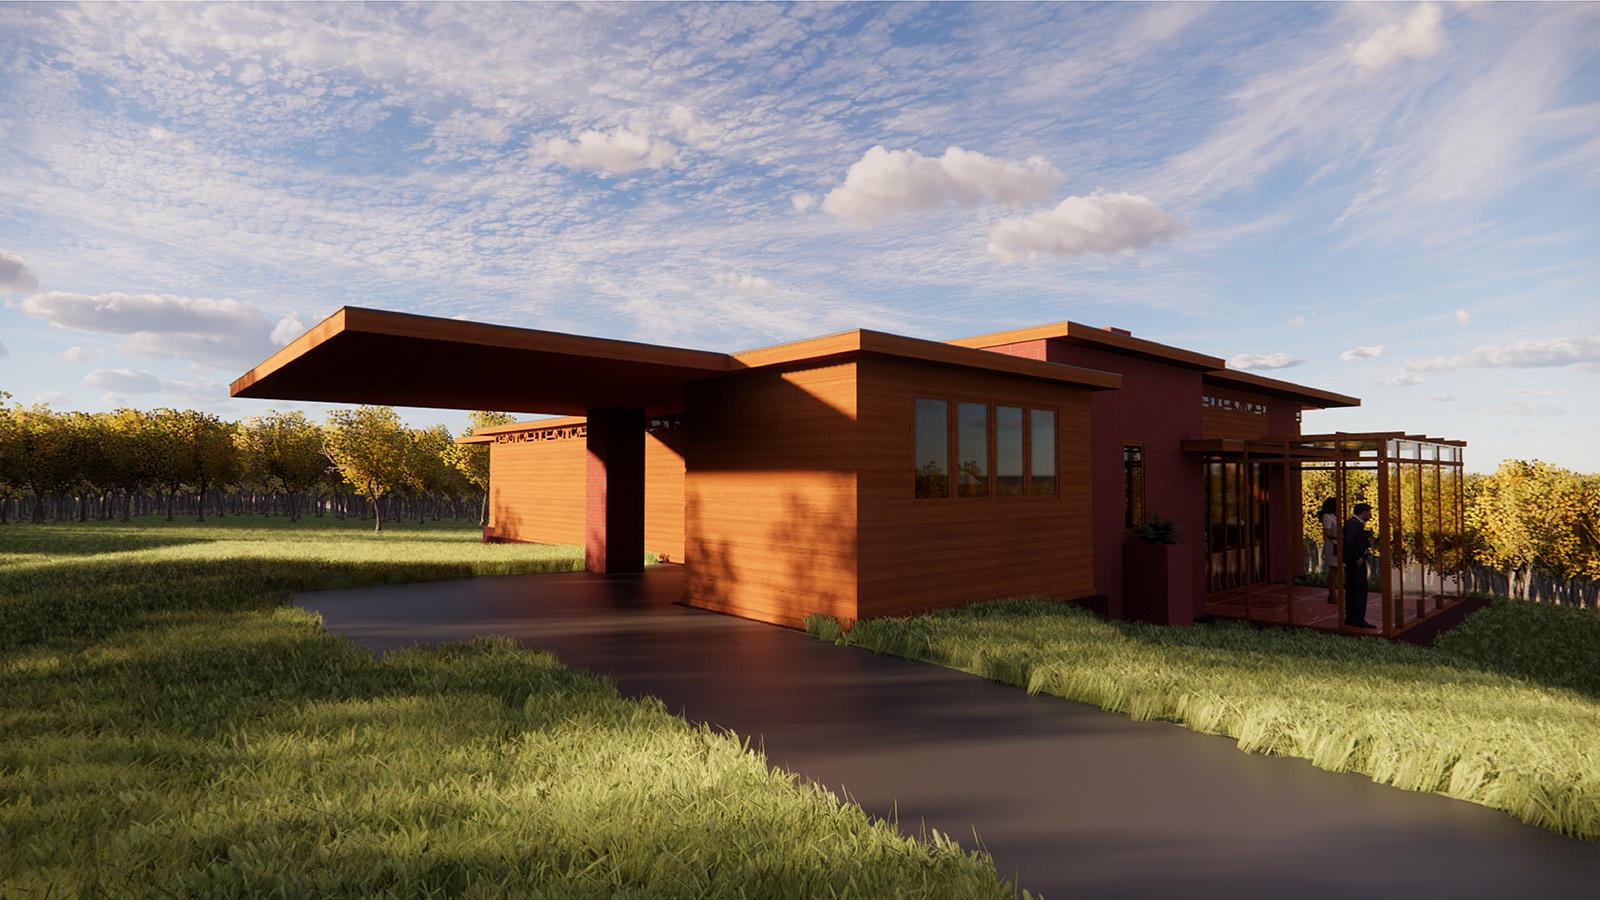 Rendering of Frank Lloyd Wright’s Pope-Leighey House